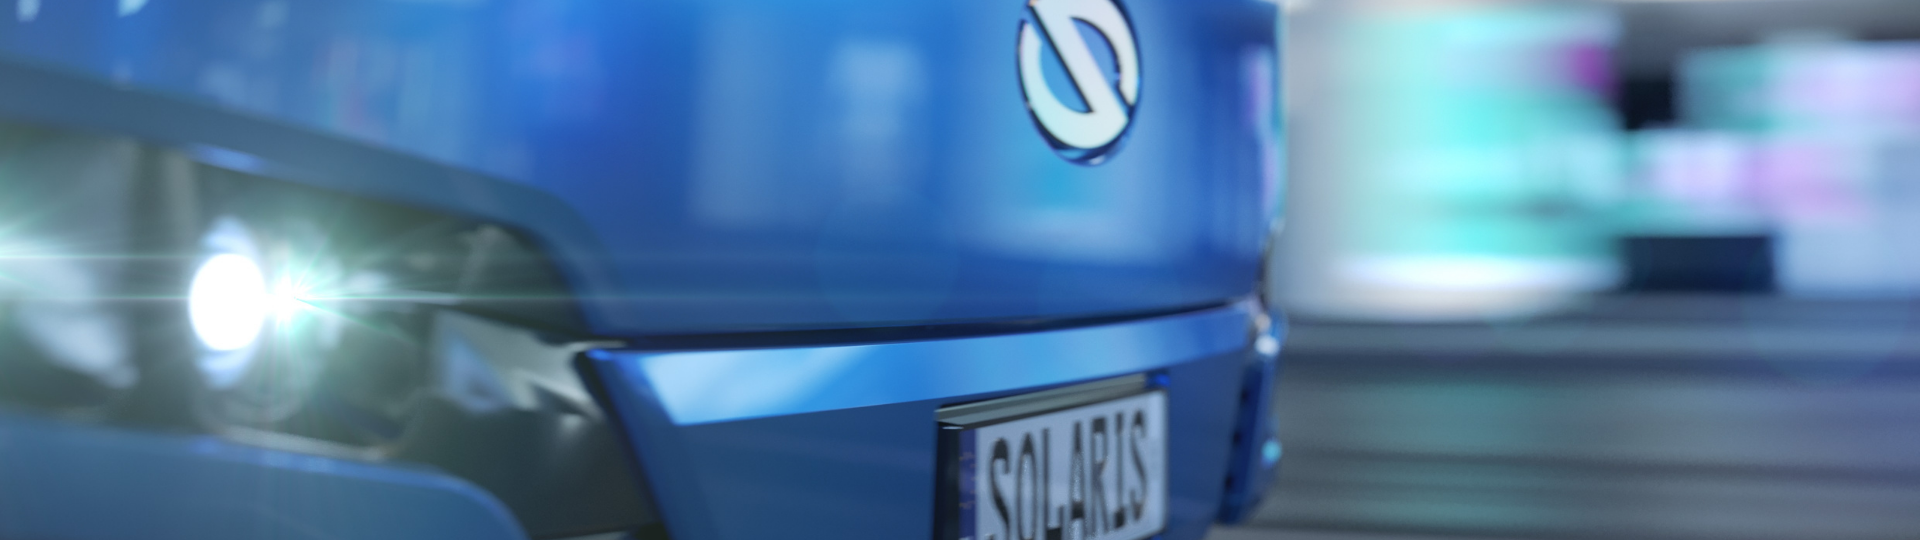 Online premiere of the new Solaris electric bus